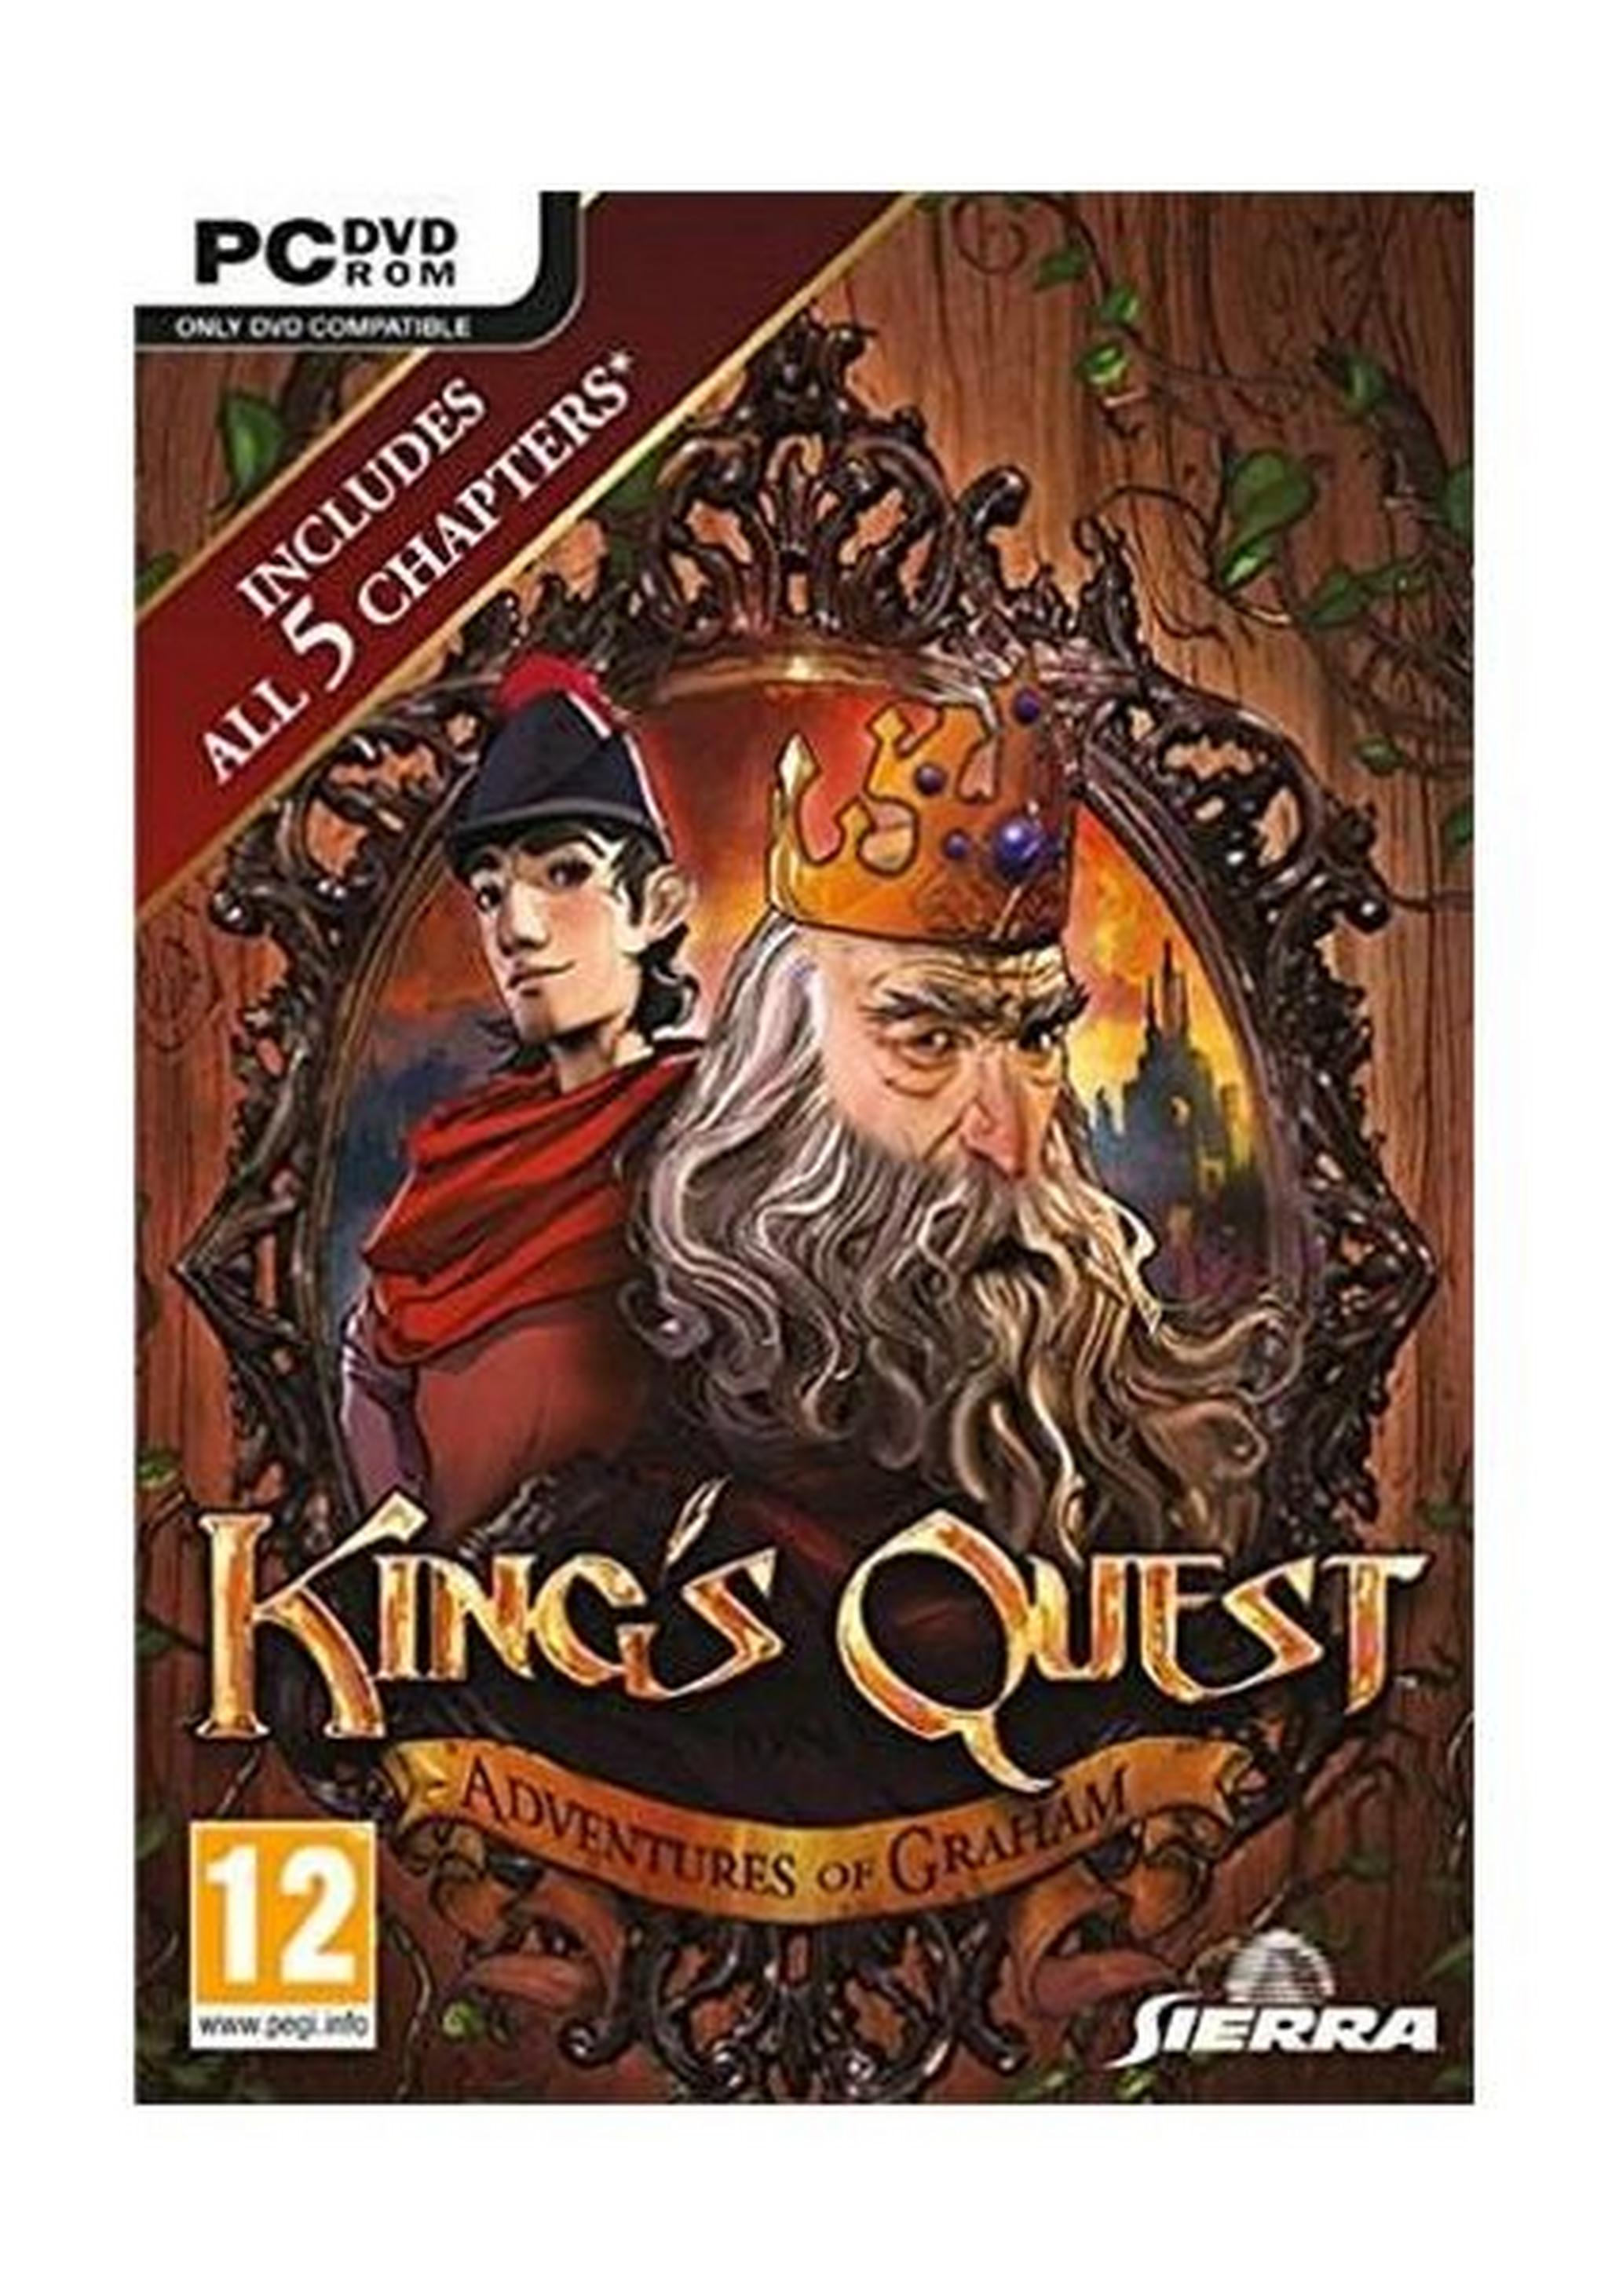 King's Quest: Adventure Of Graham - The Complete Collection - PC Game